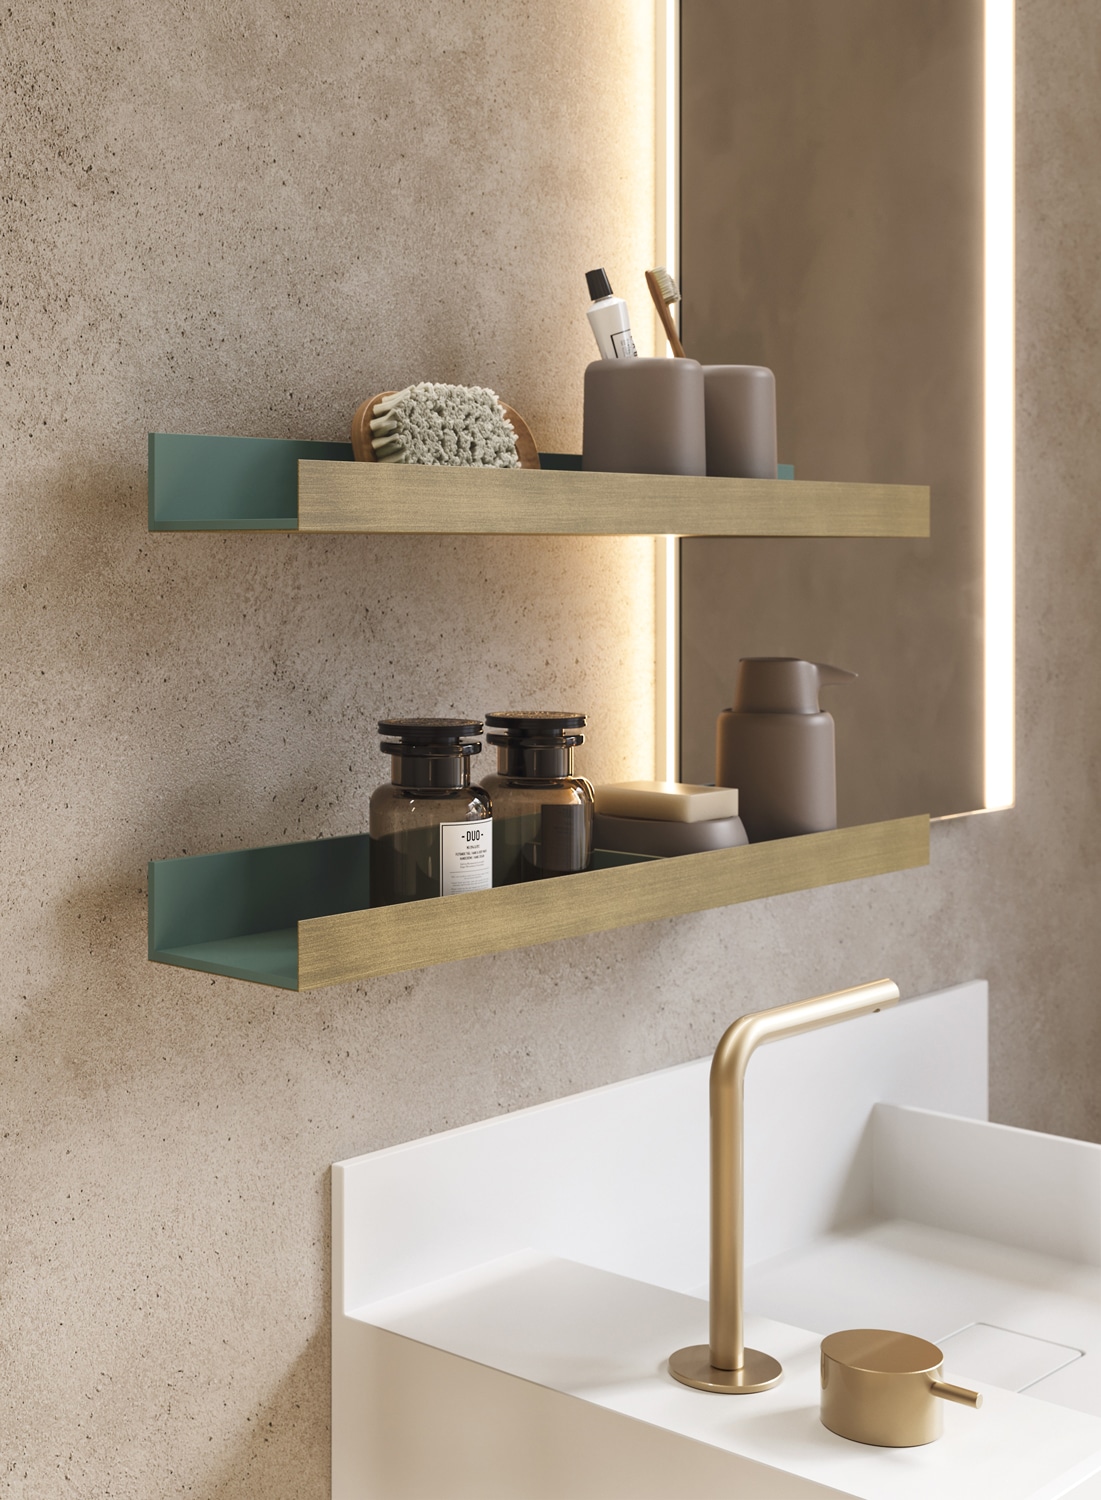 Elegant open shelves with exterior in metal. The interior can be in matte lacquer or wood matching the rest of the bathroom cabinetry.